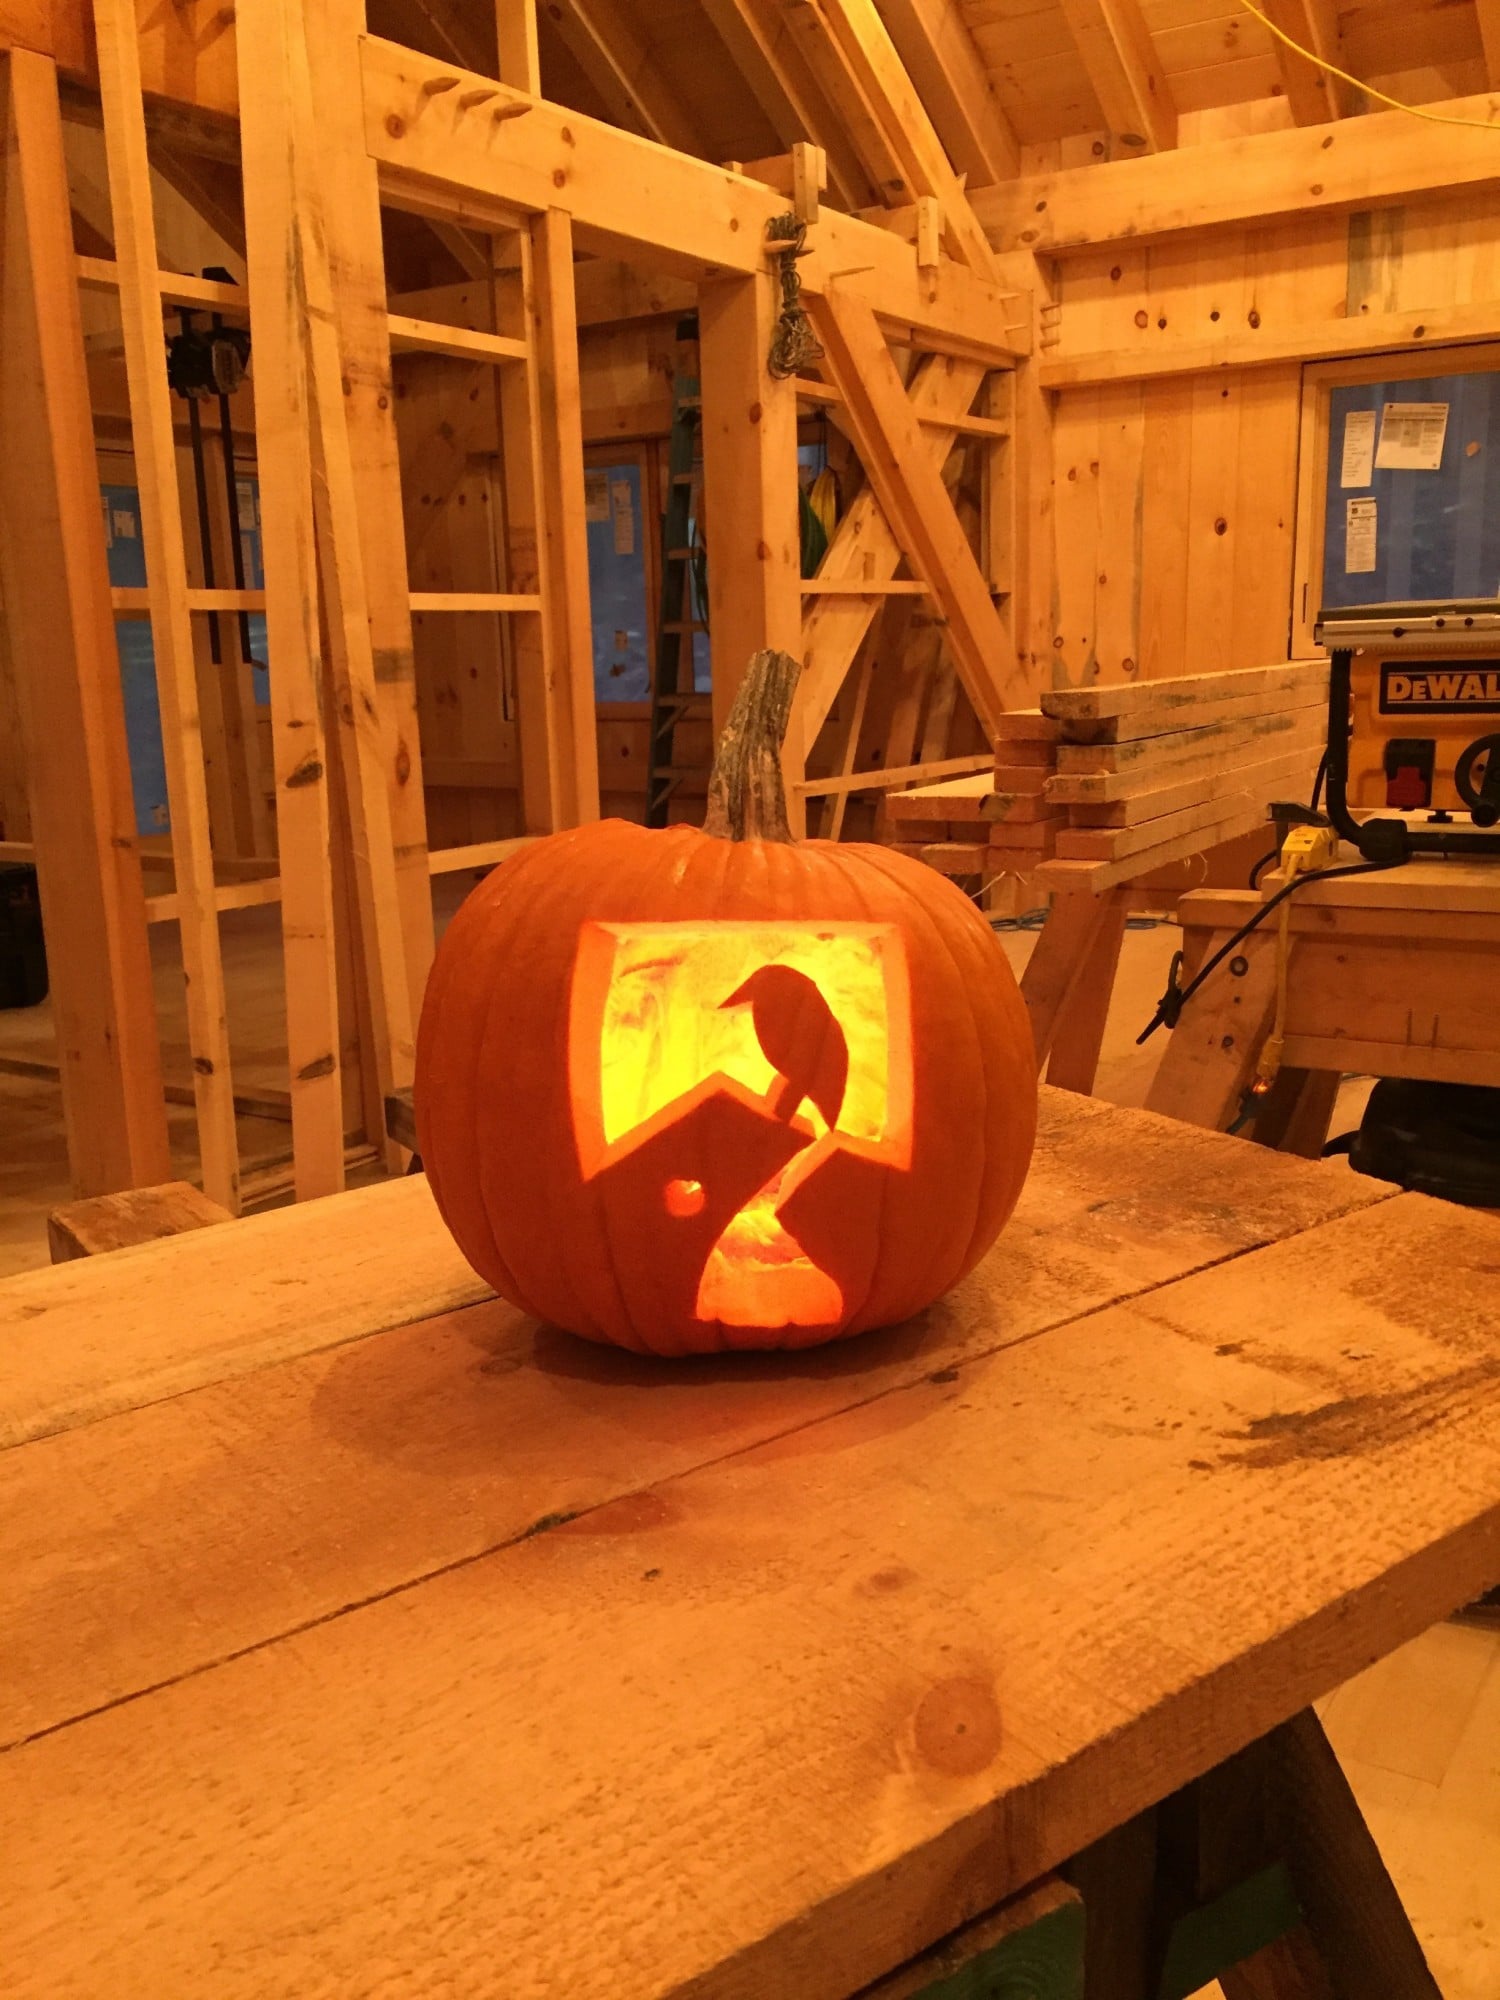 Lovely pumpkin carving of our bird symbol